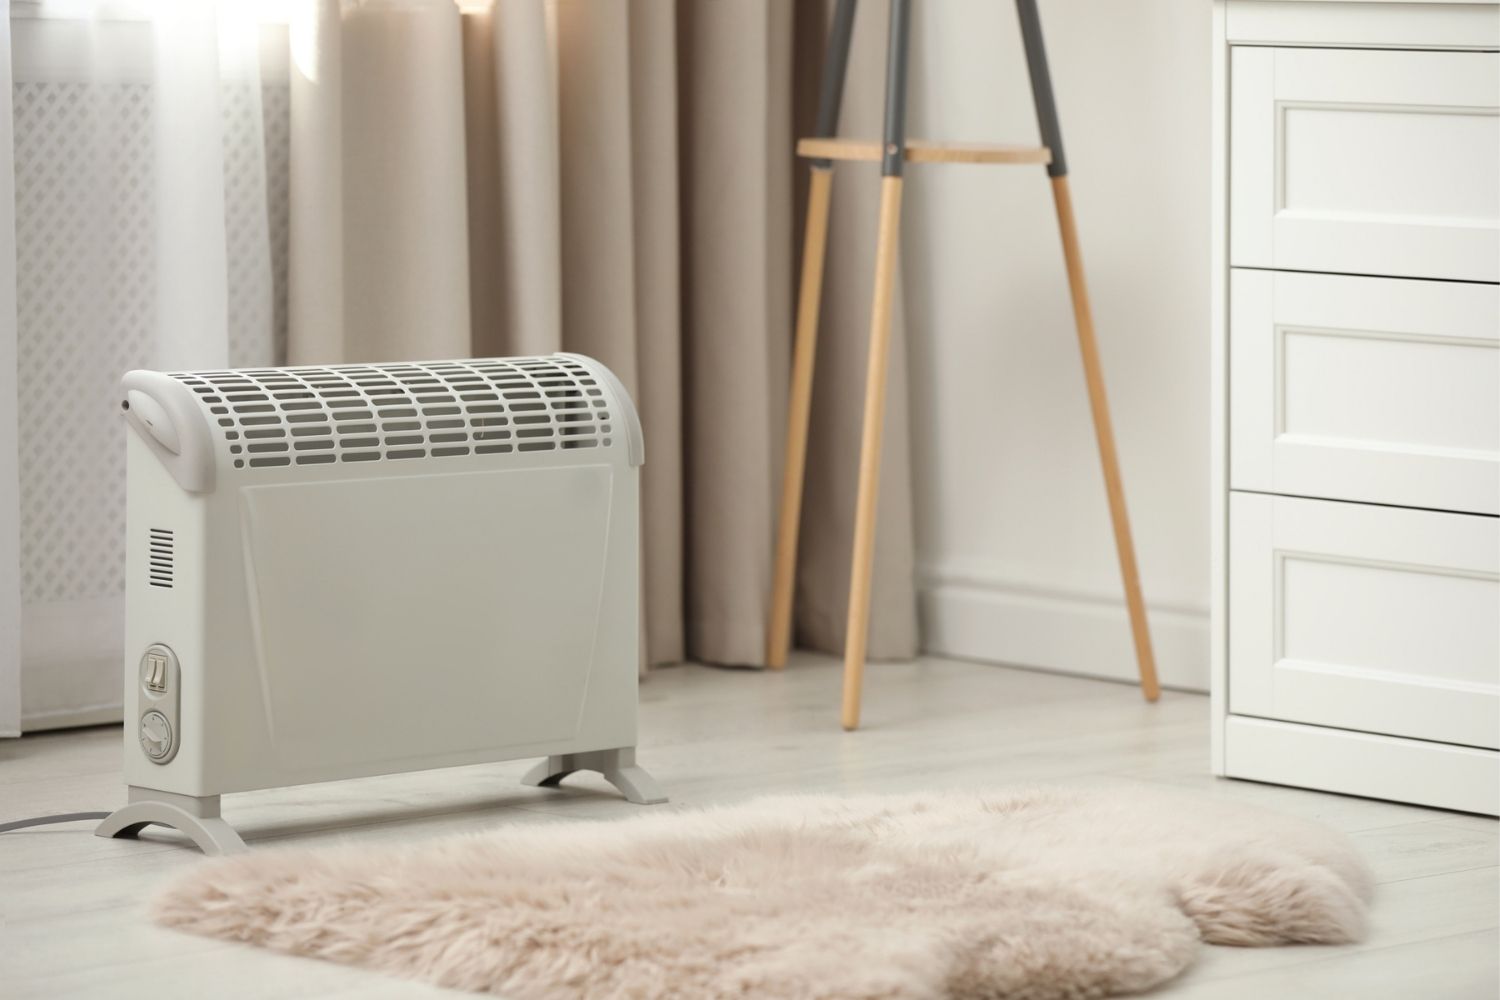 The best space heater for bedrooms option set up in a bedroom